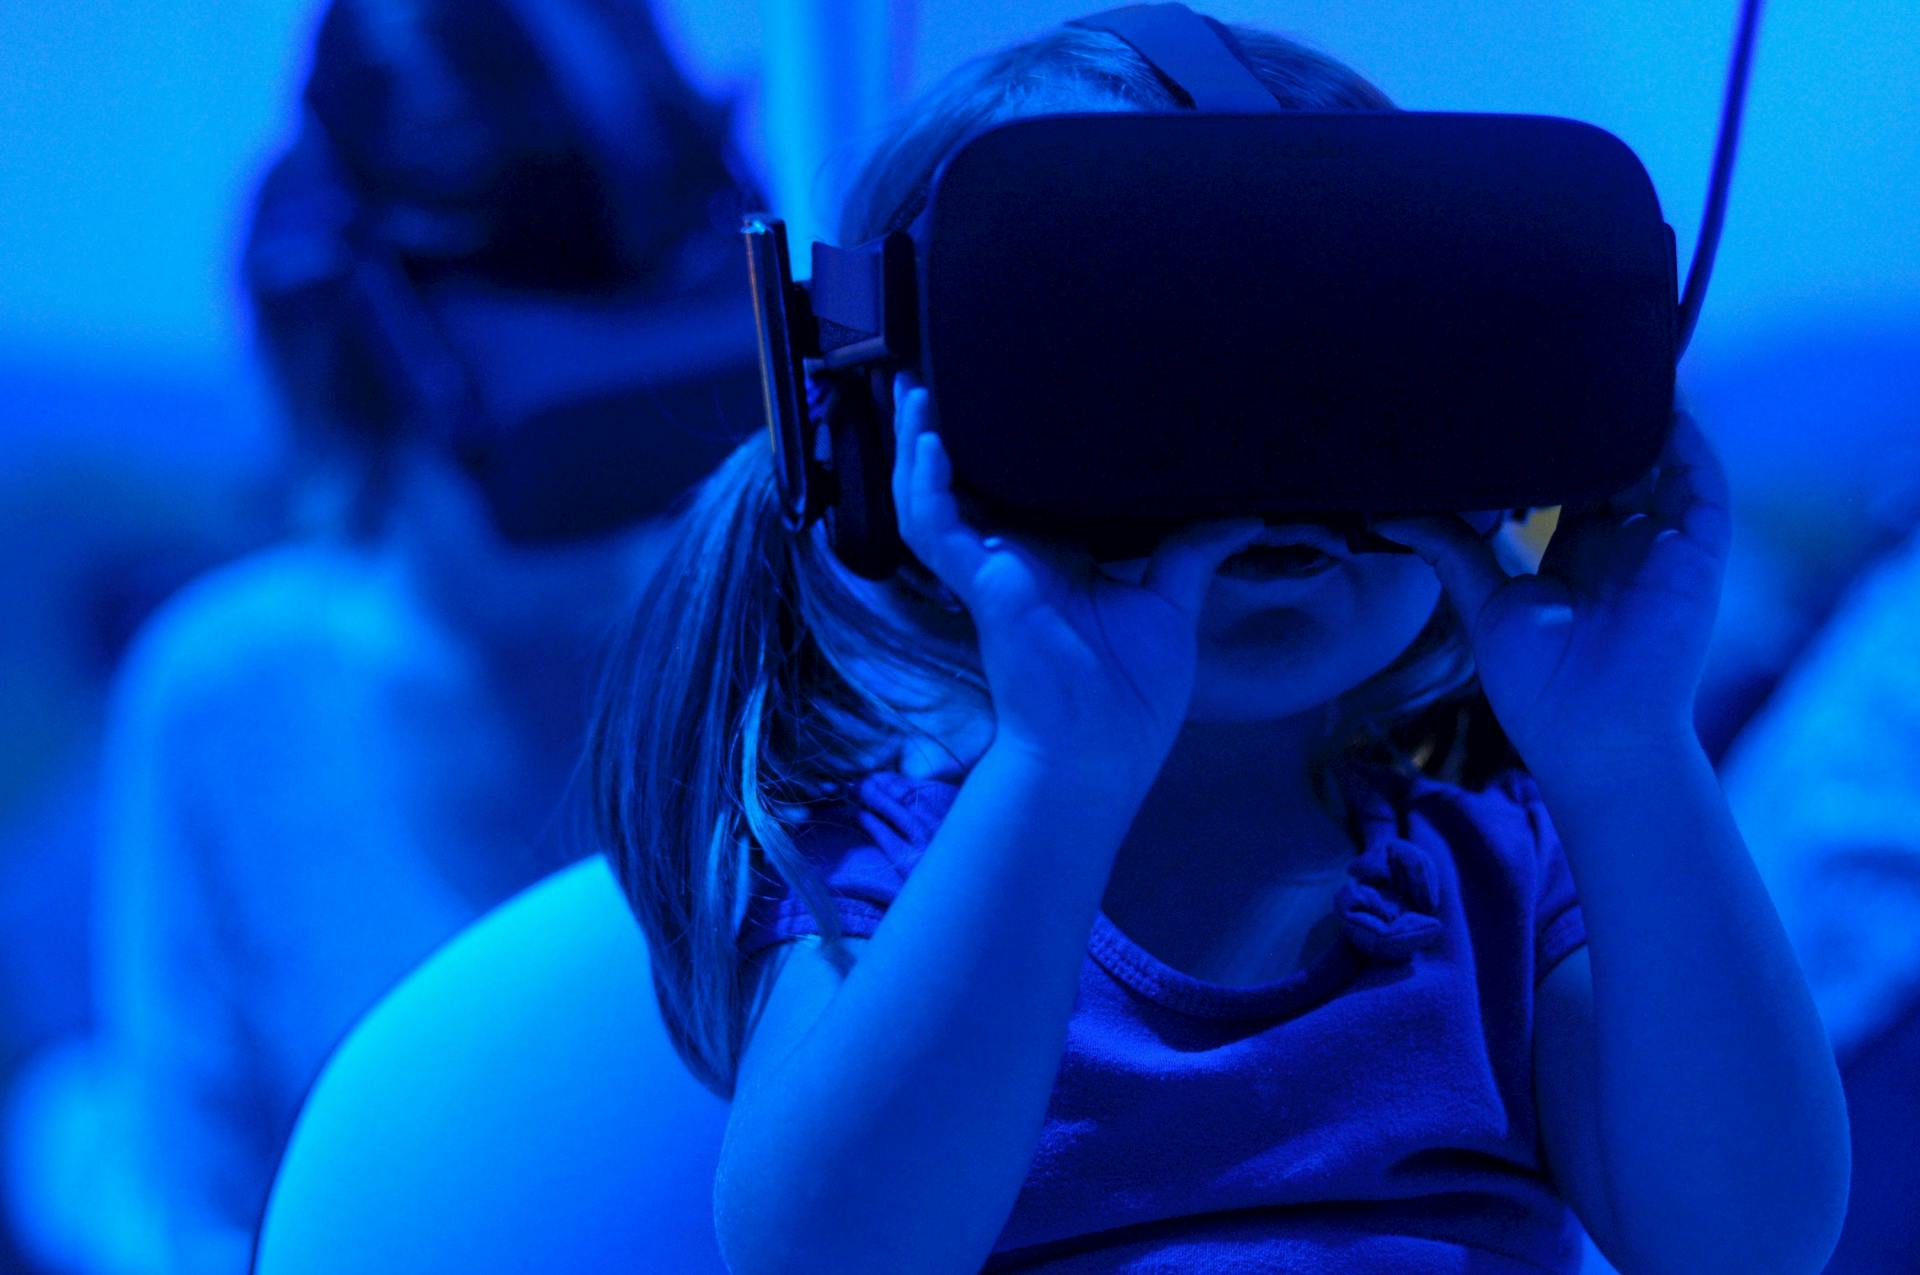 Young girl wearing virtual reality headset. VR and AR are key areas to watch in content marketing.